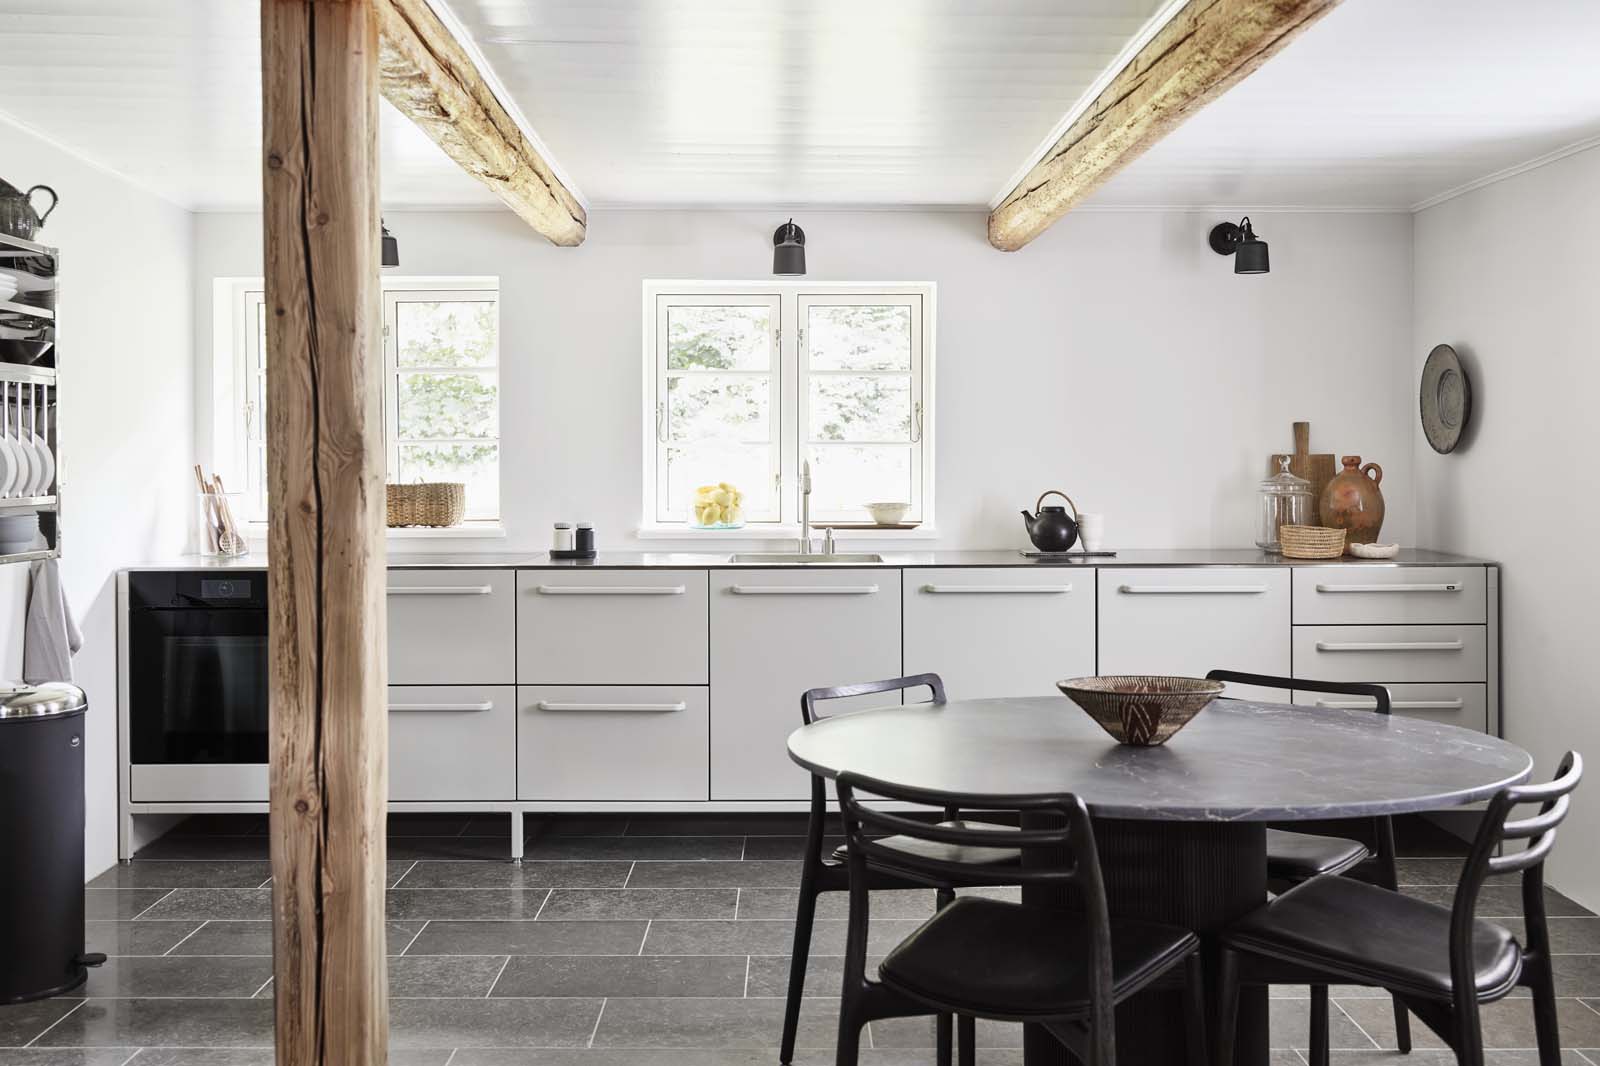 The Vipp Farmhouse - a rustic-contemporary holiday rental deep in the Danish countryside | These Four Walls blog